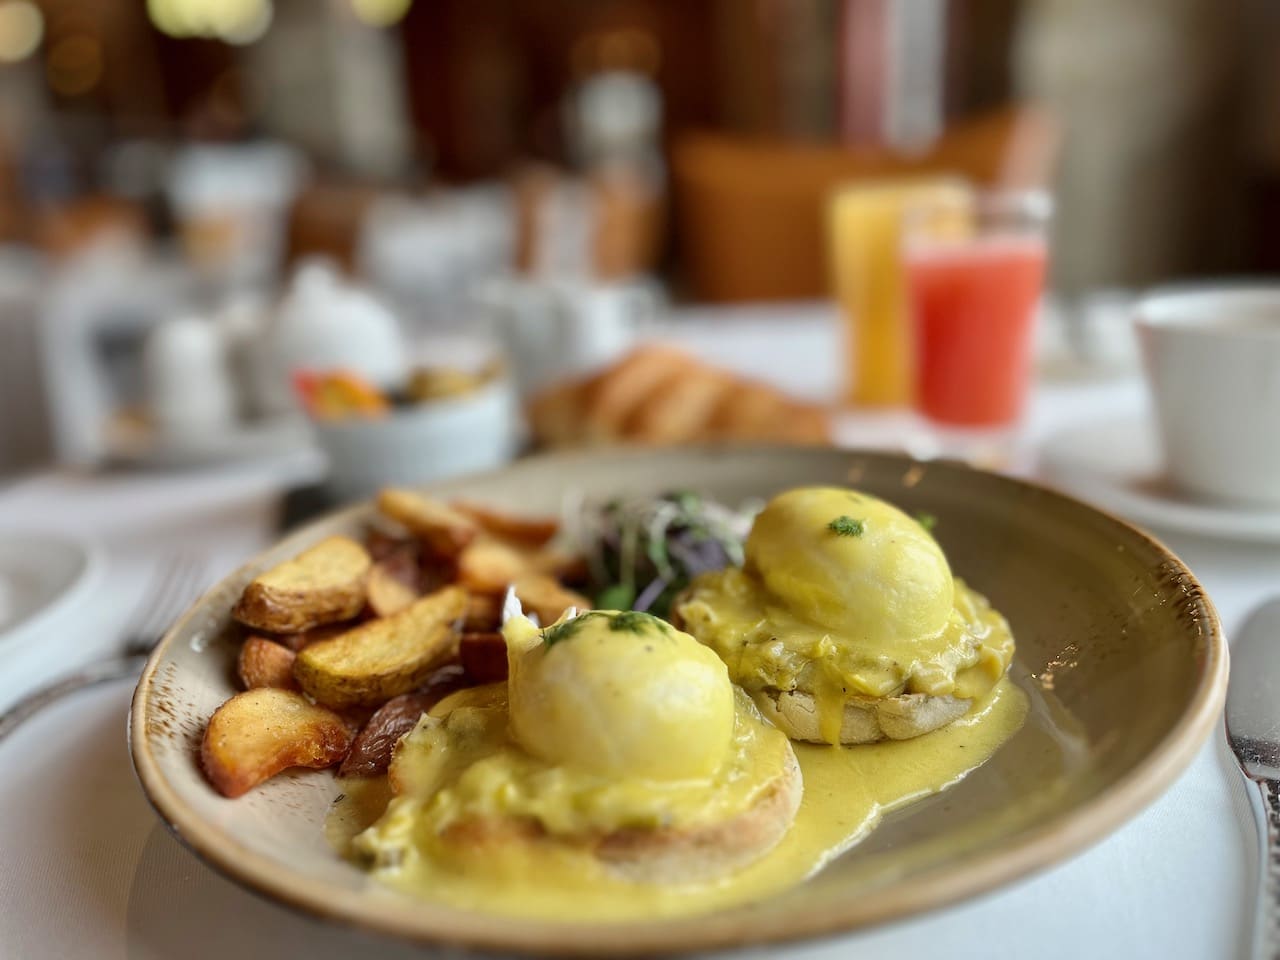 Tuck into some Eggs Benny with leeks and Oka cheese for breakfast at Hôtel Quintessence.